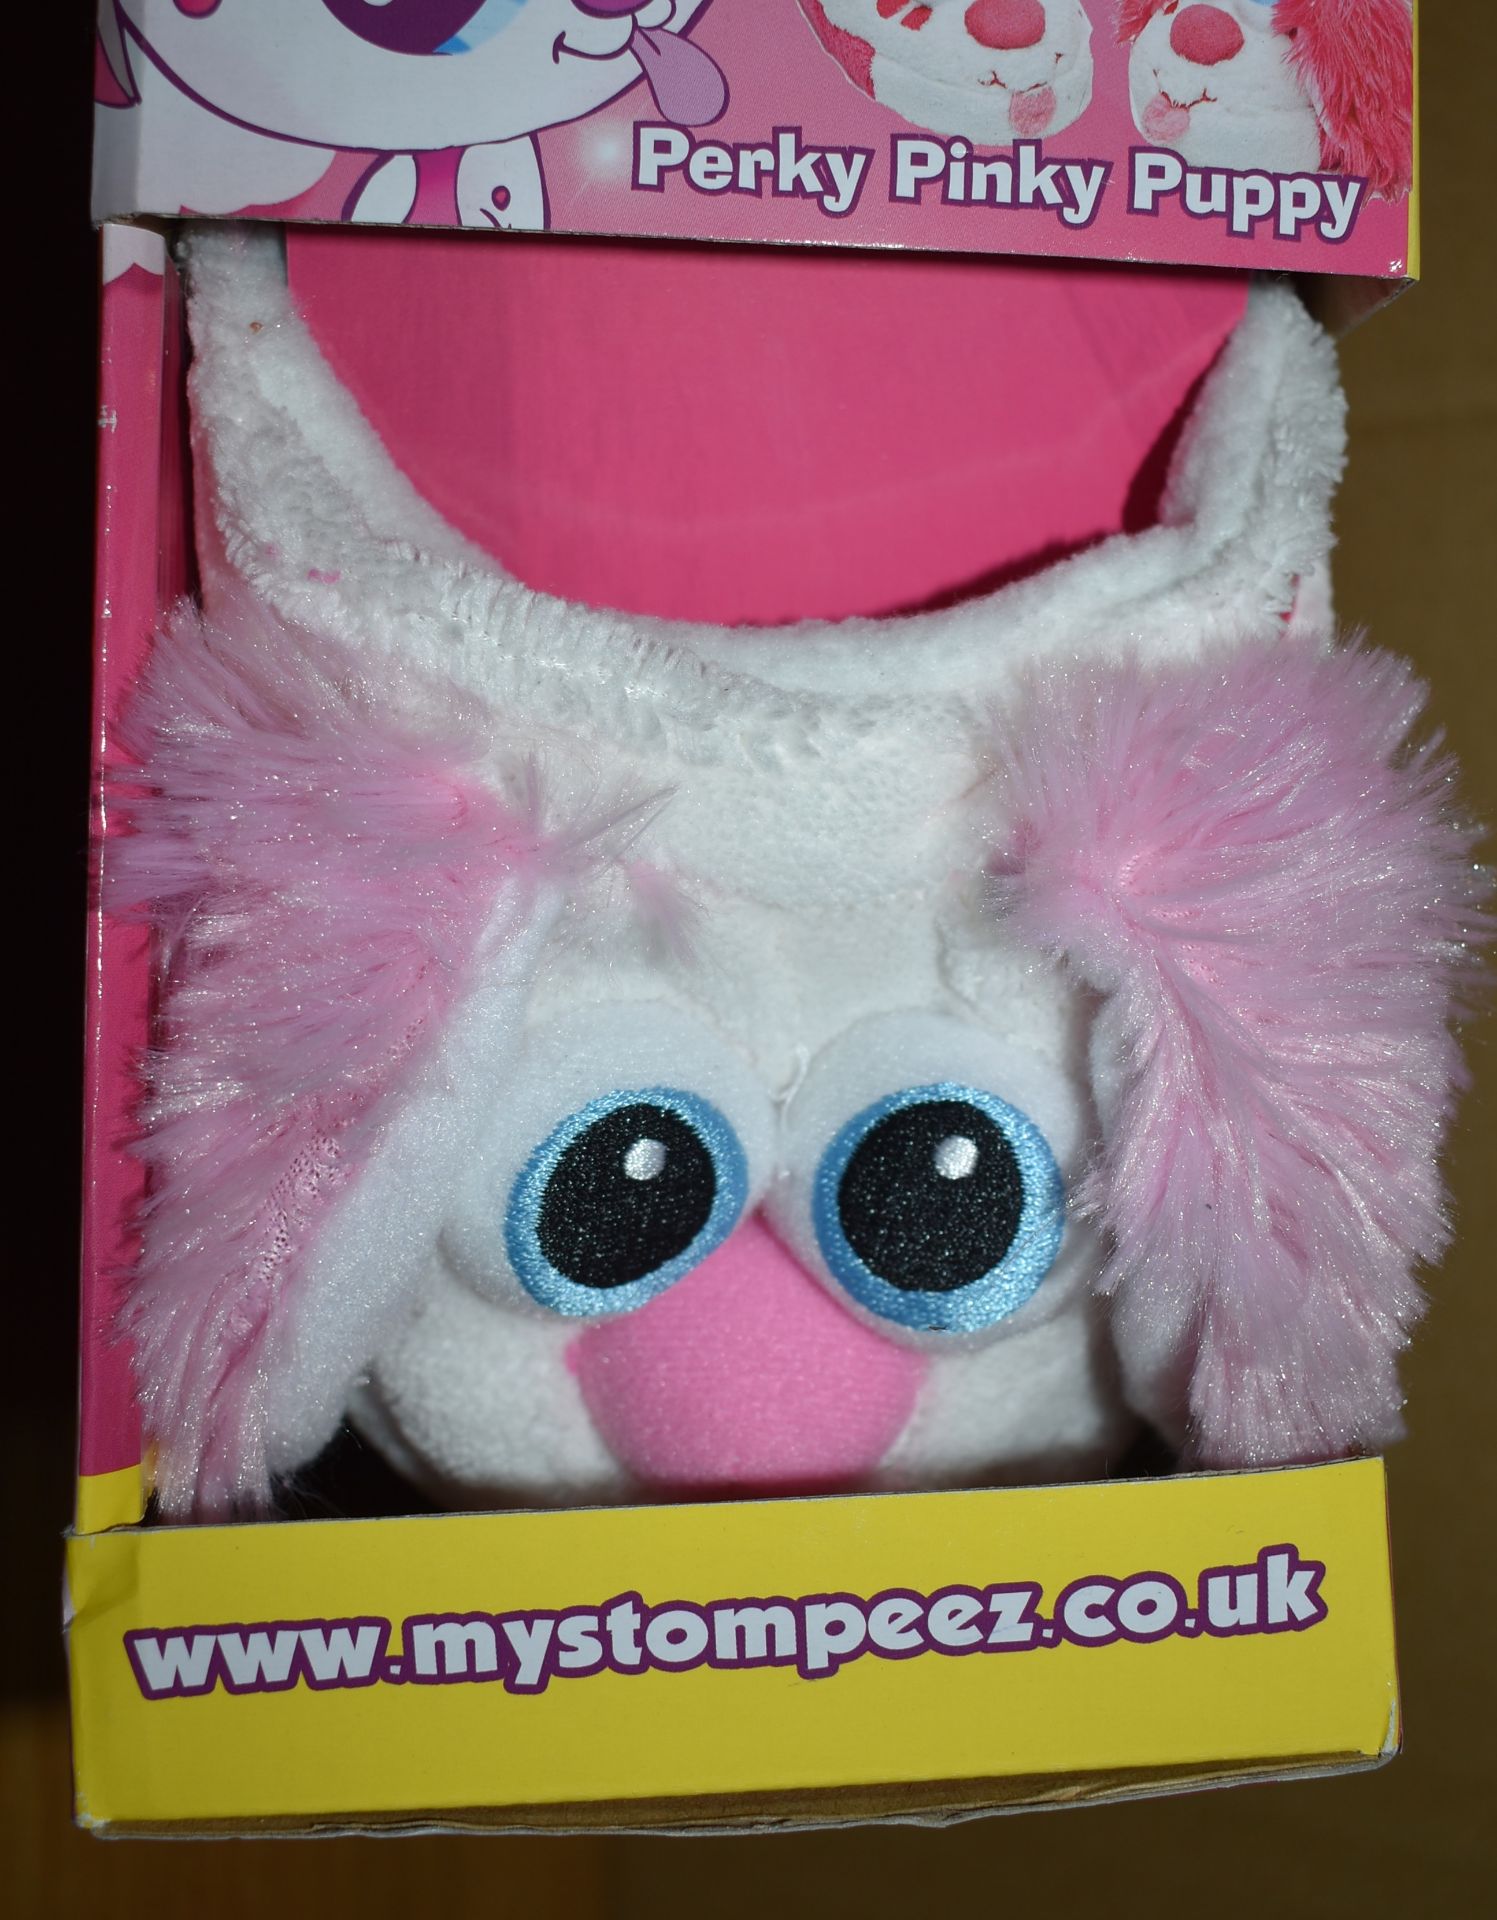 25 x Stompeez Pink Perky Puppy Slippers - Fleece Slip-On Children's Slippers - Size Small 10 to 12 - - Image 8 of 10